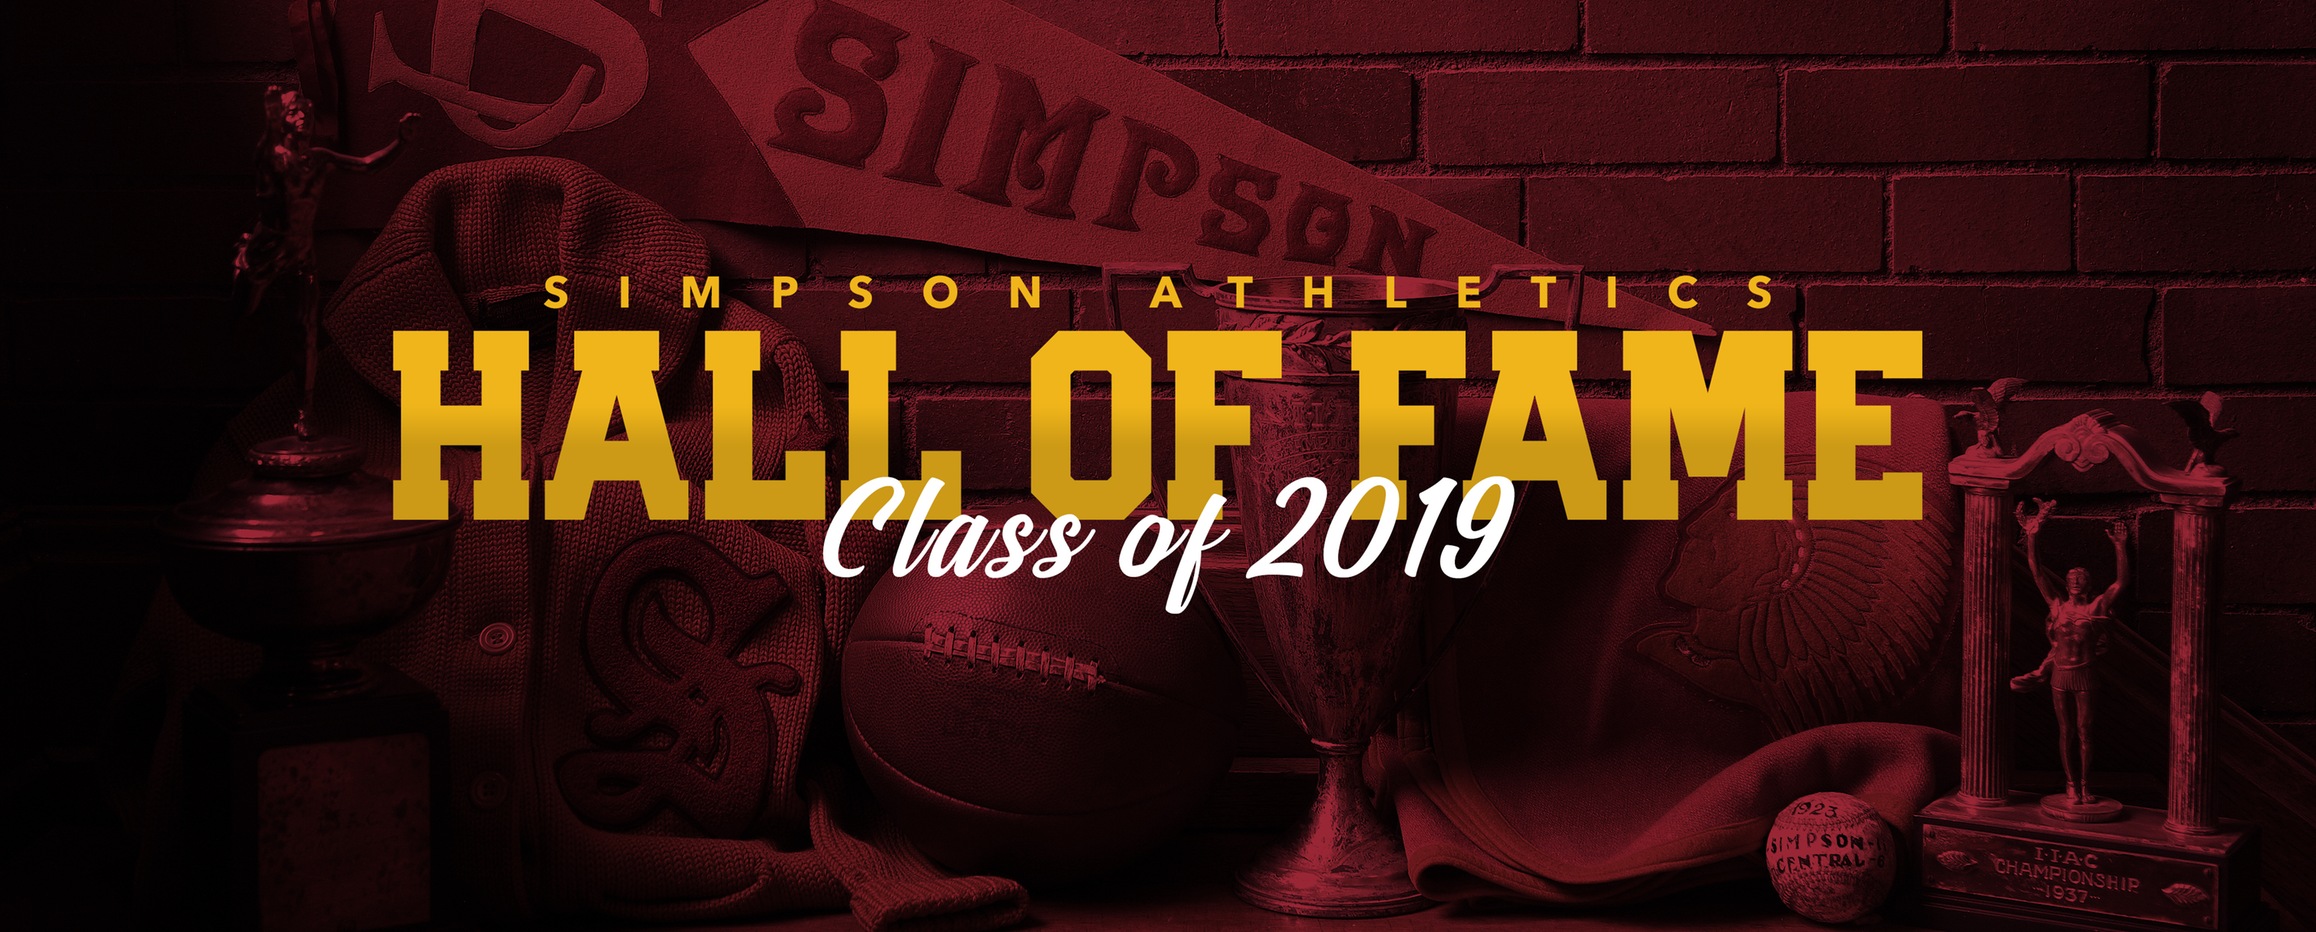 "S" Club Hall of Fame inducts four in 2019